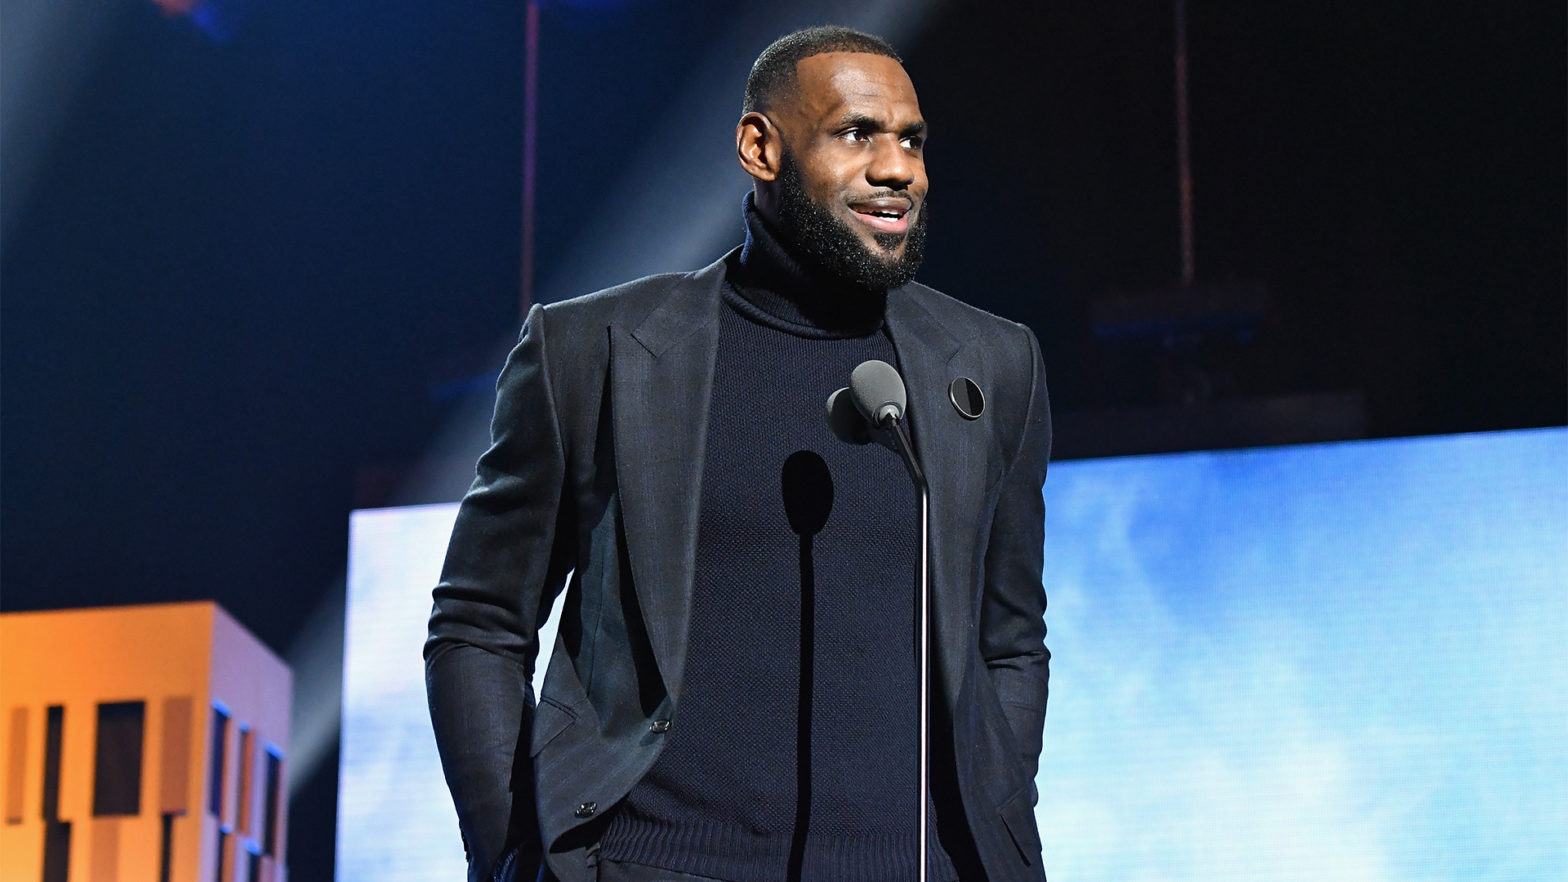 LeBron James Joins Crypto.com To Teach Blockchain Technology To Inner-City Students